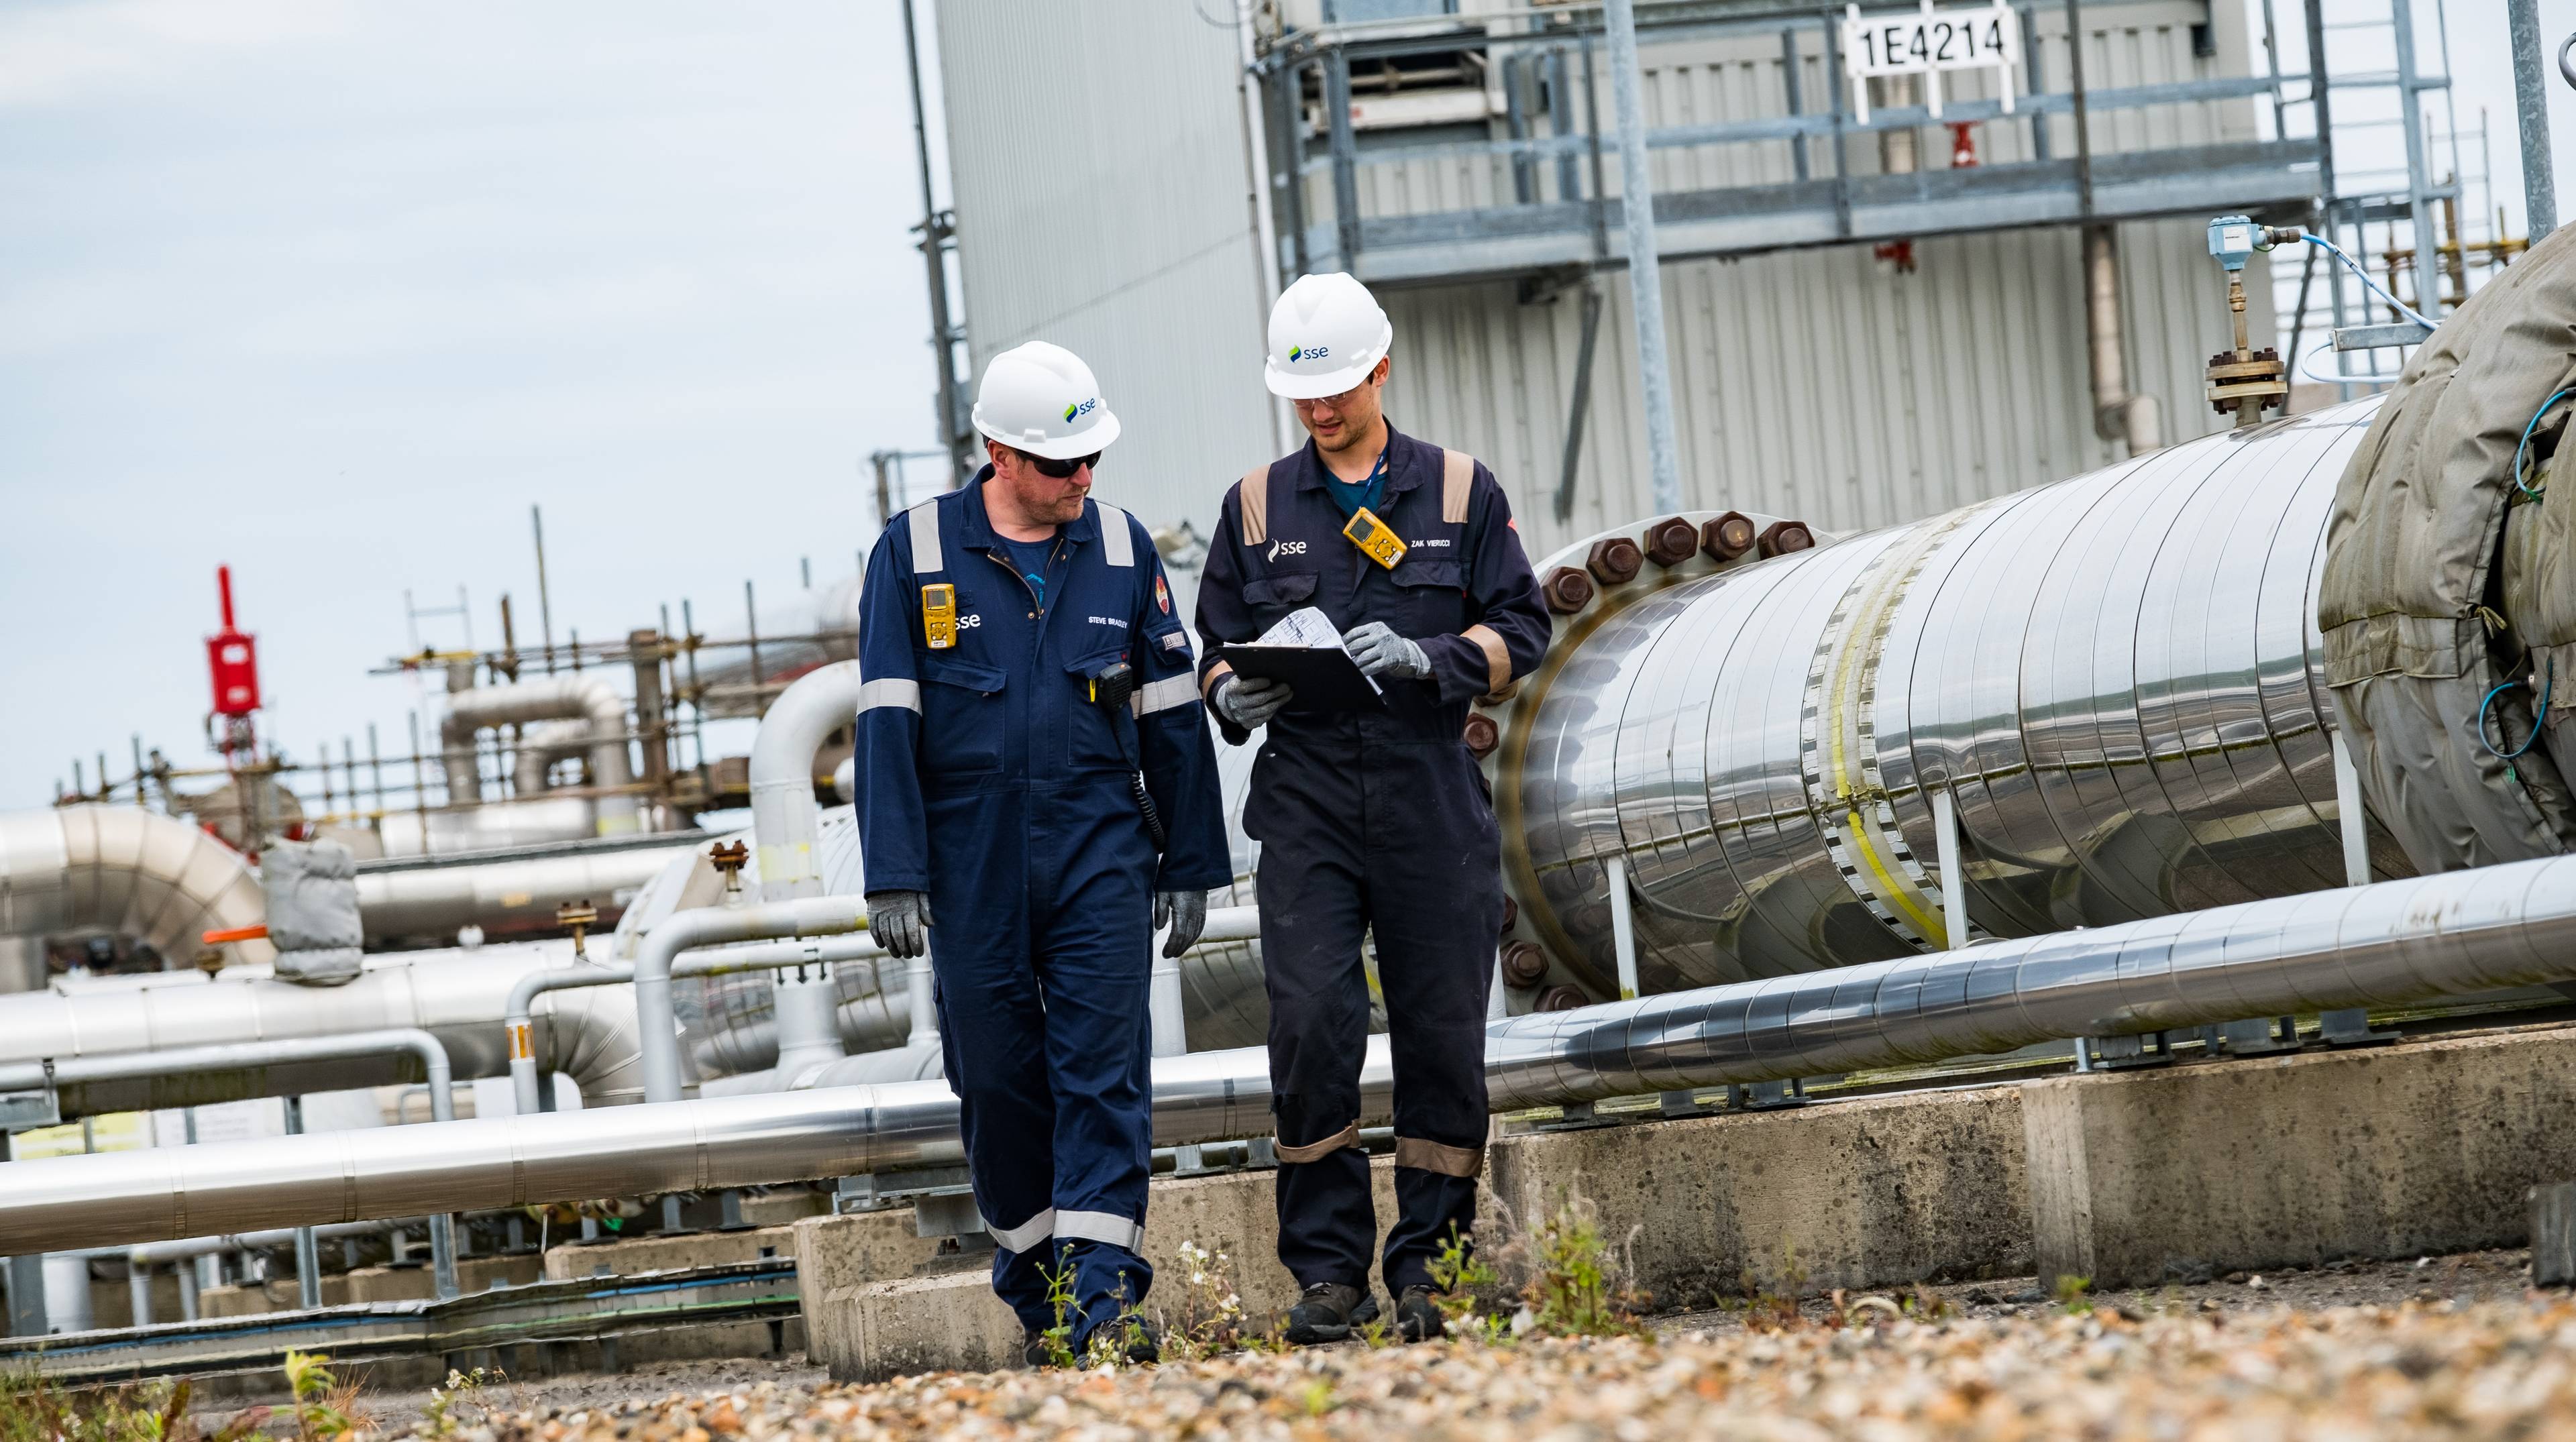 Two employees at the Aldbrough gas storage facility - processing facility in the background